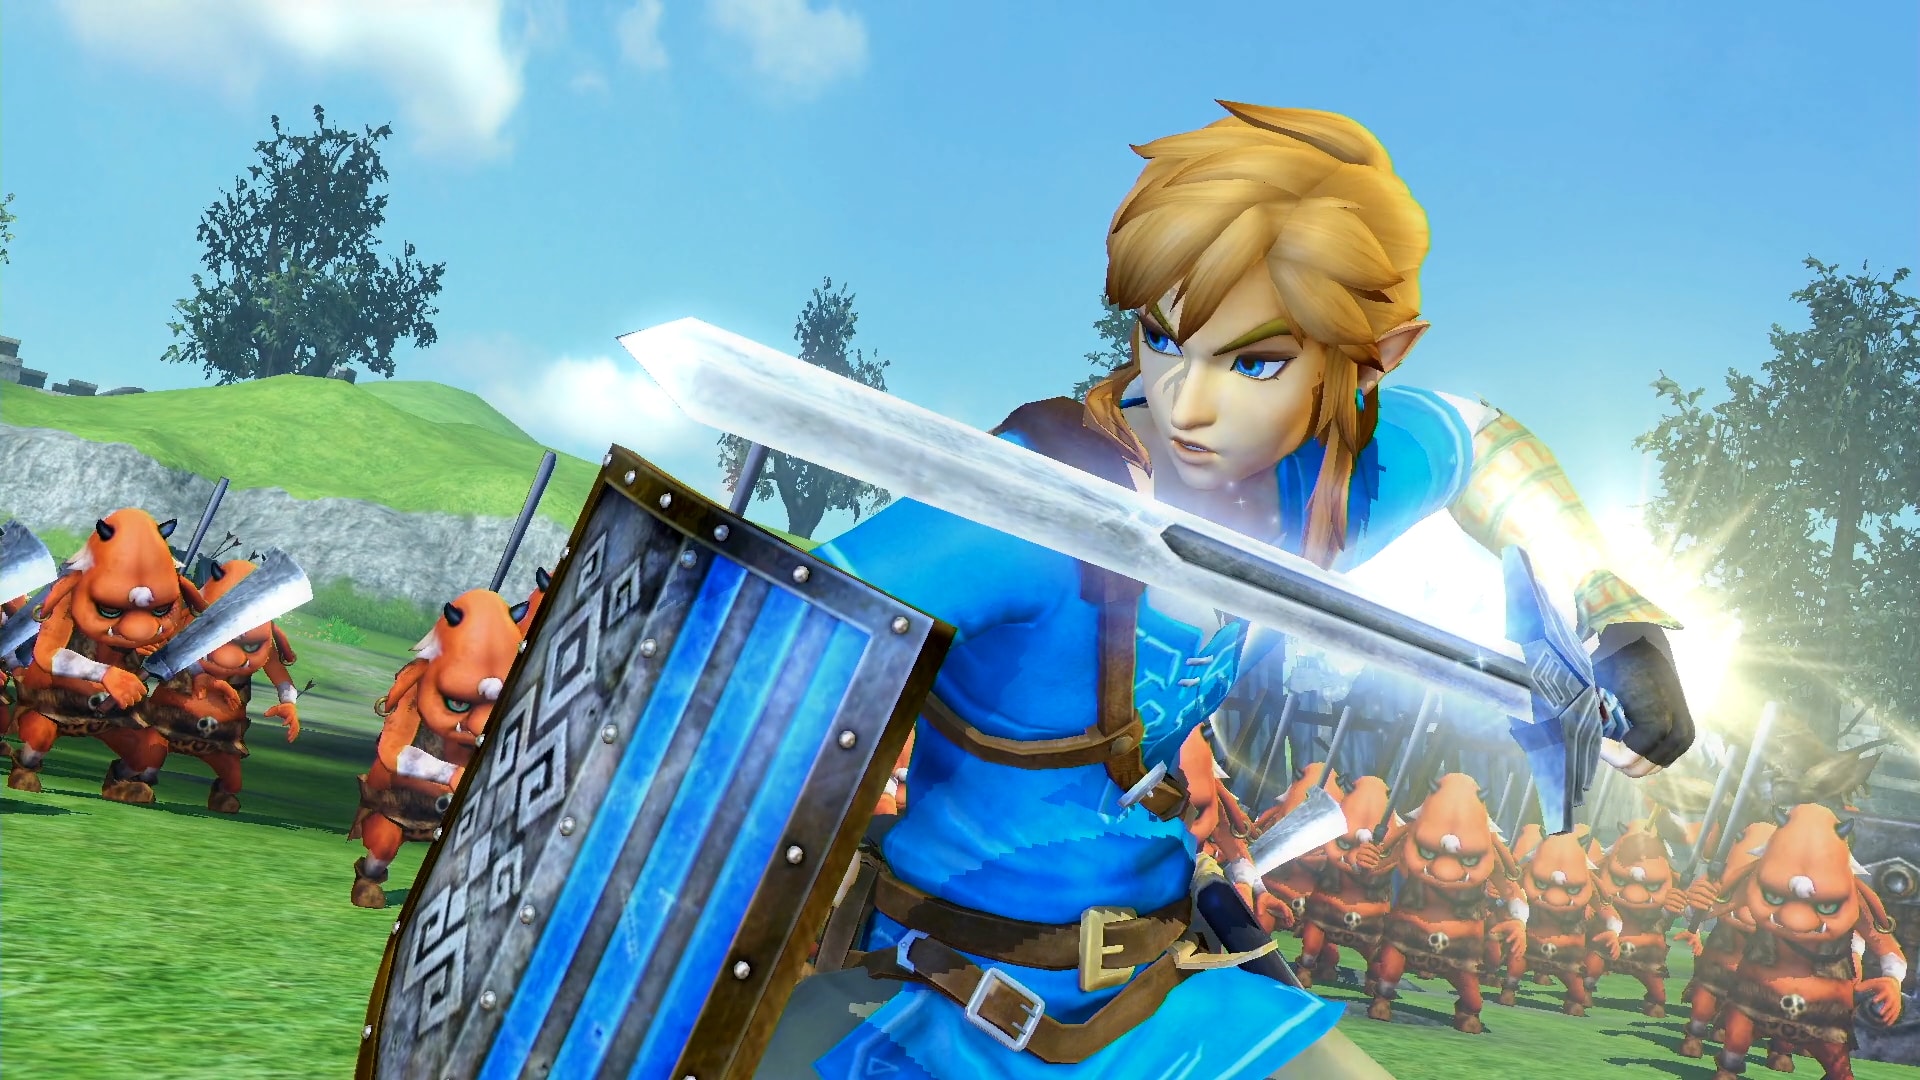 Does Hyrule Warriors live up to it's Wii U and 3DS counterparts?